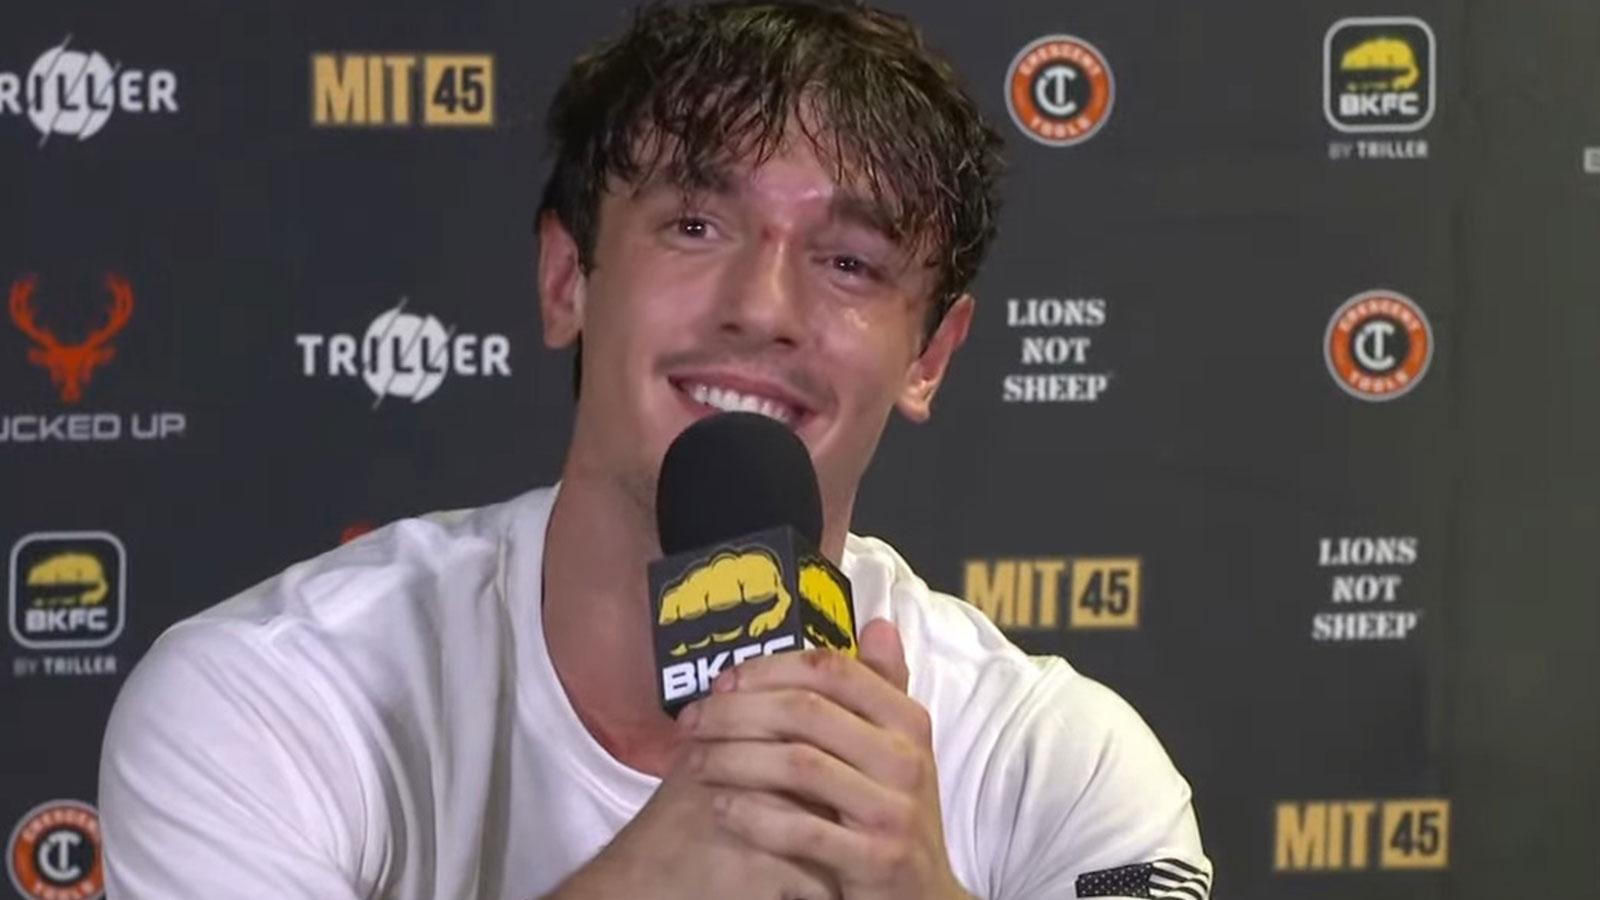 Bryce Hall holding a microphone at BKFC post-fight press conference